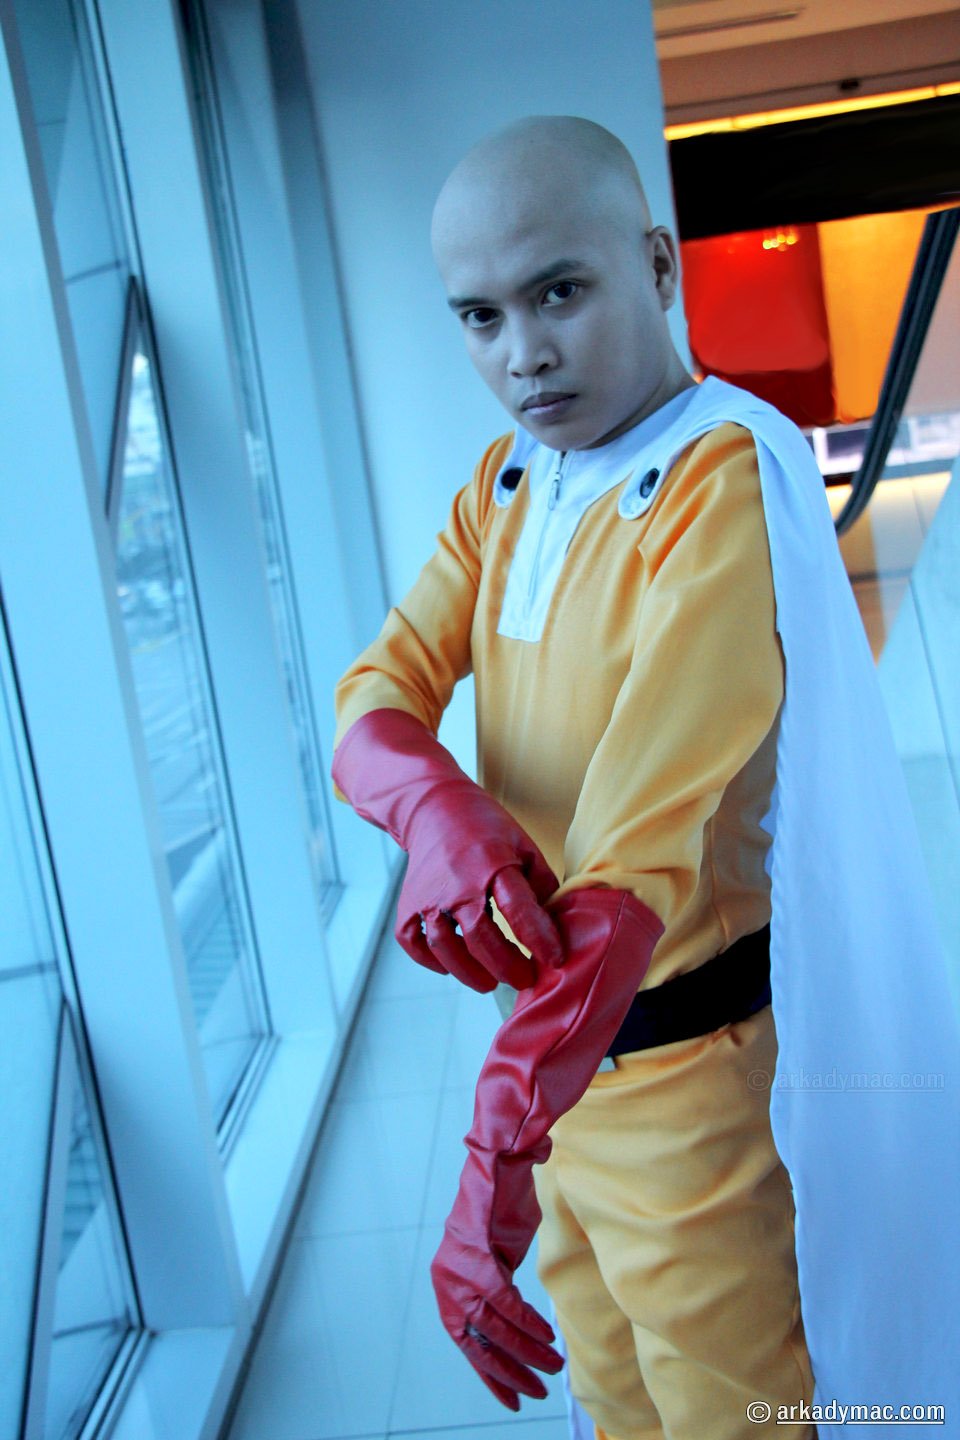 One Punch-Man Cosplay Photoshoot | The Cosplay and Anime Café ...